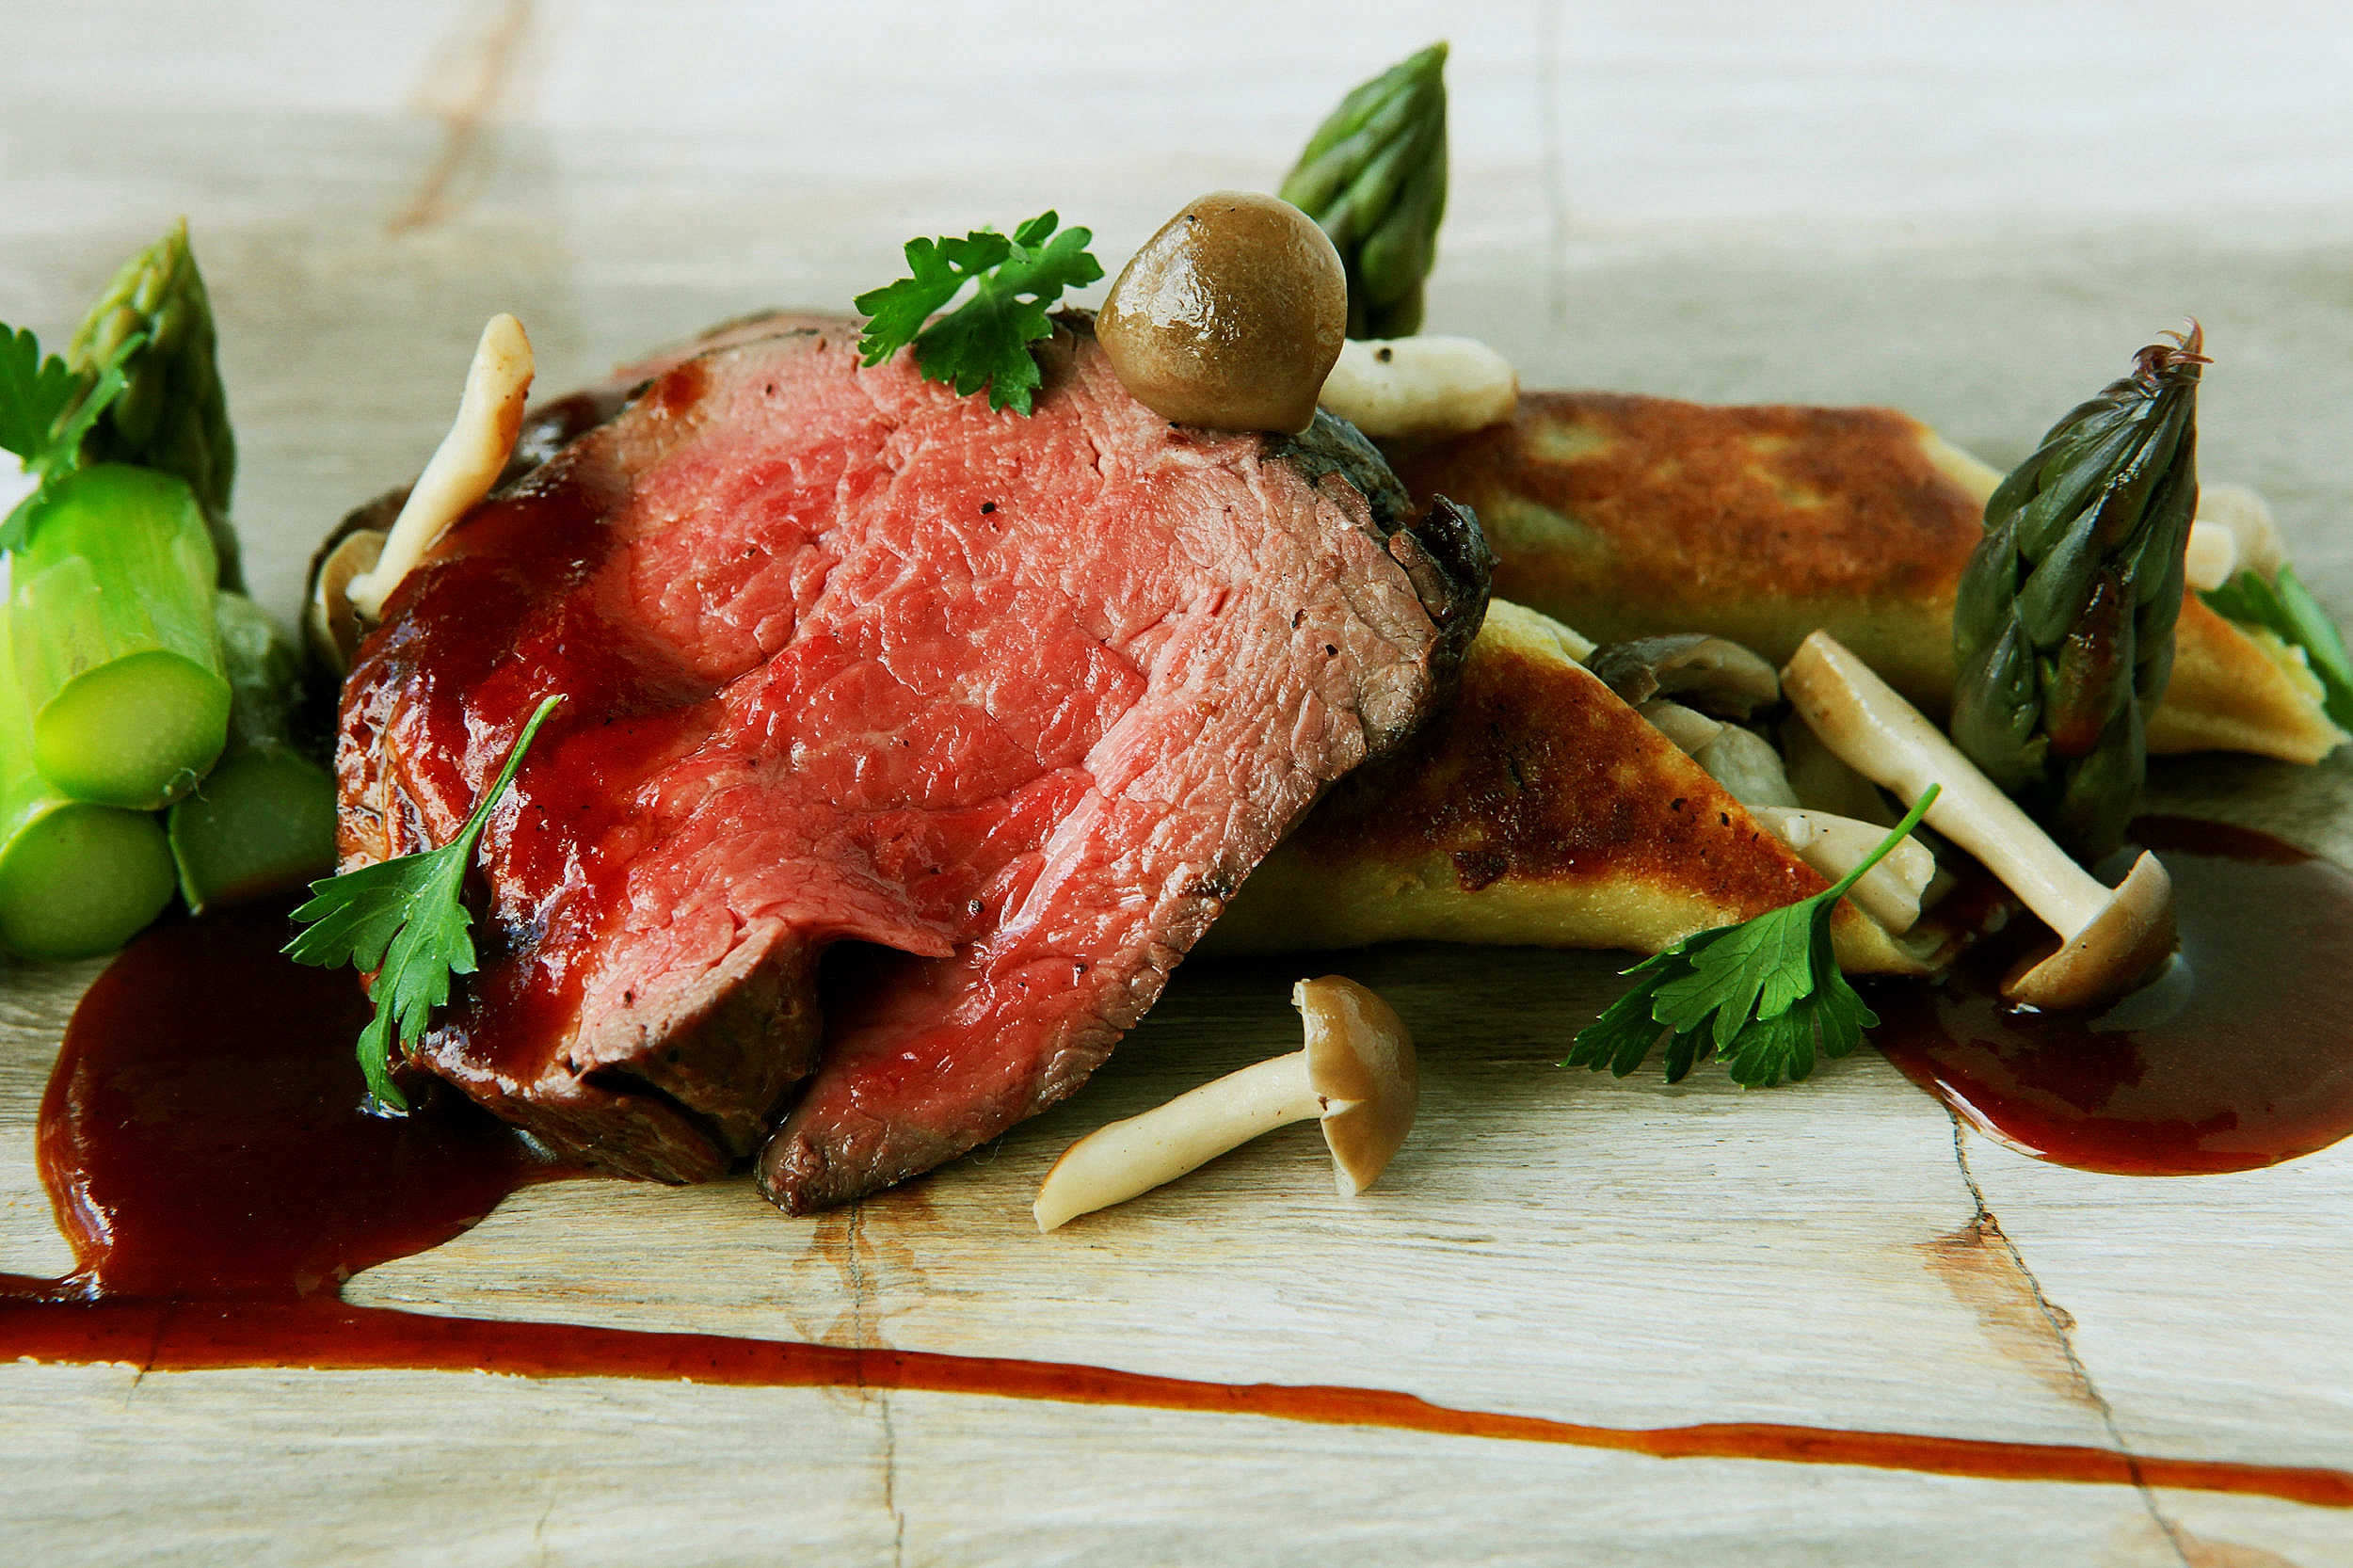 Beef tenderloin with red wine reduction, asparagus and chanterelle mushroom crepes